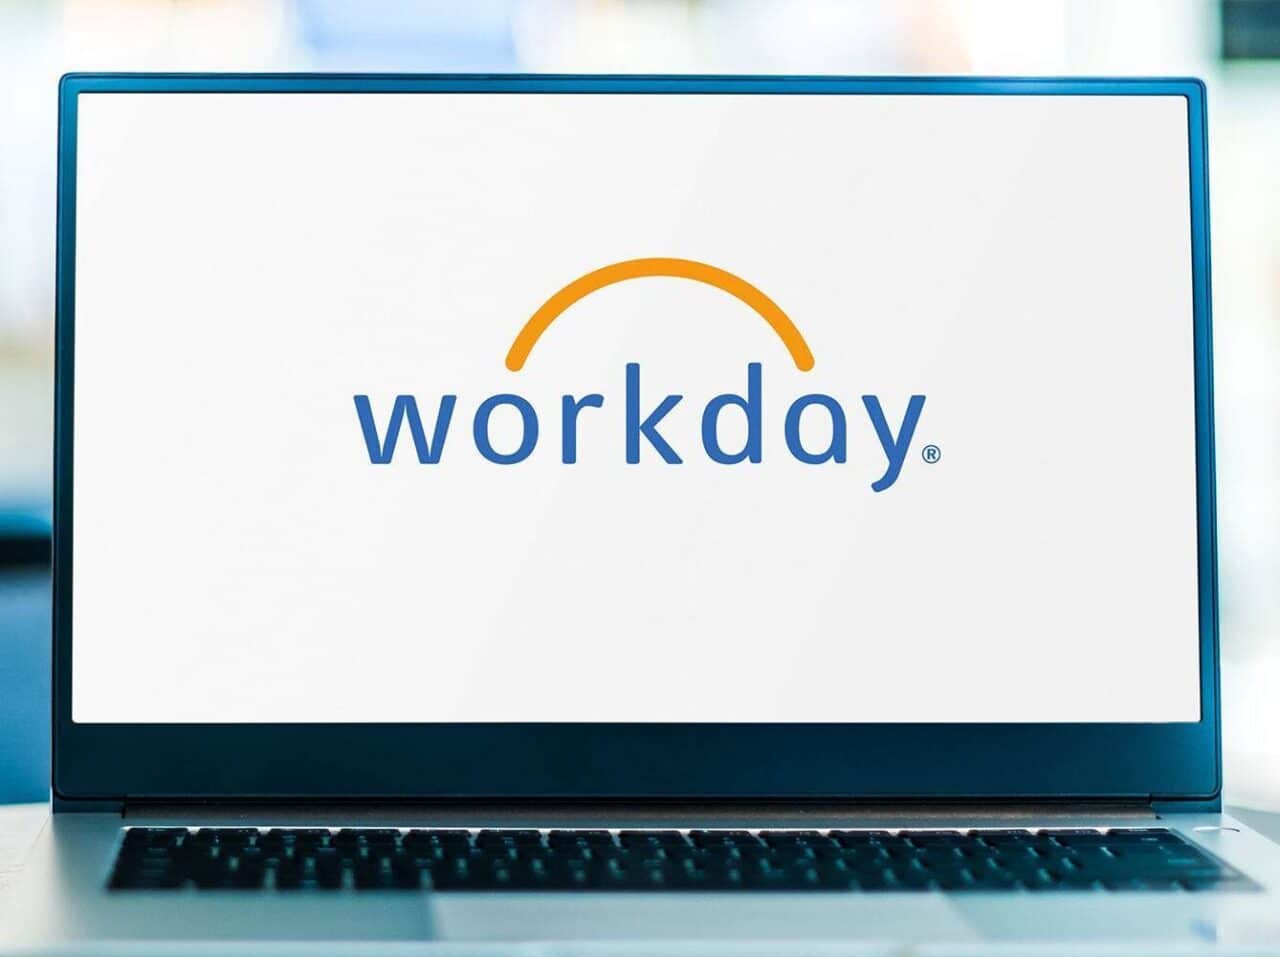 Workday Services Partner